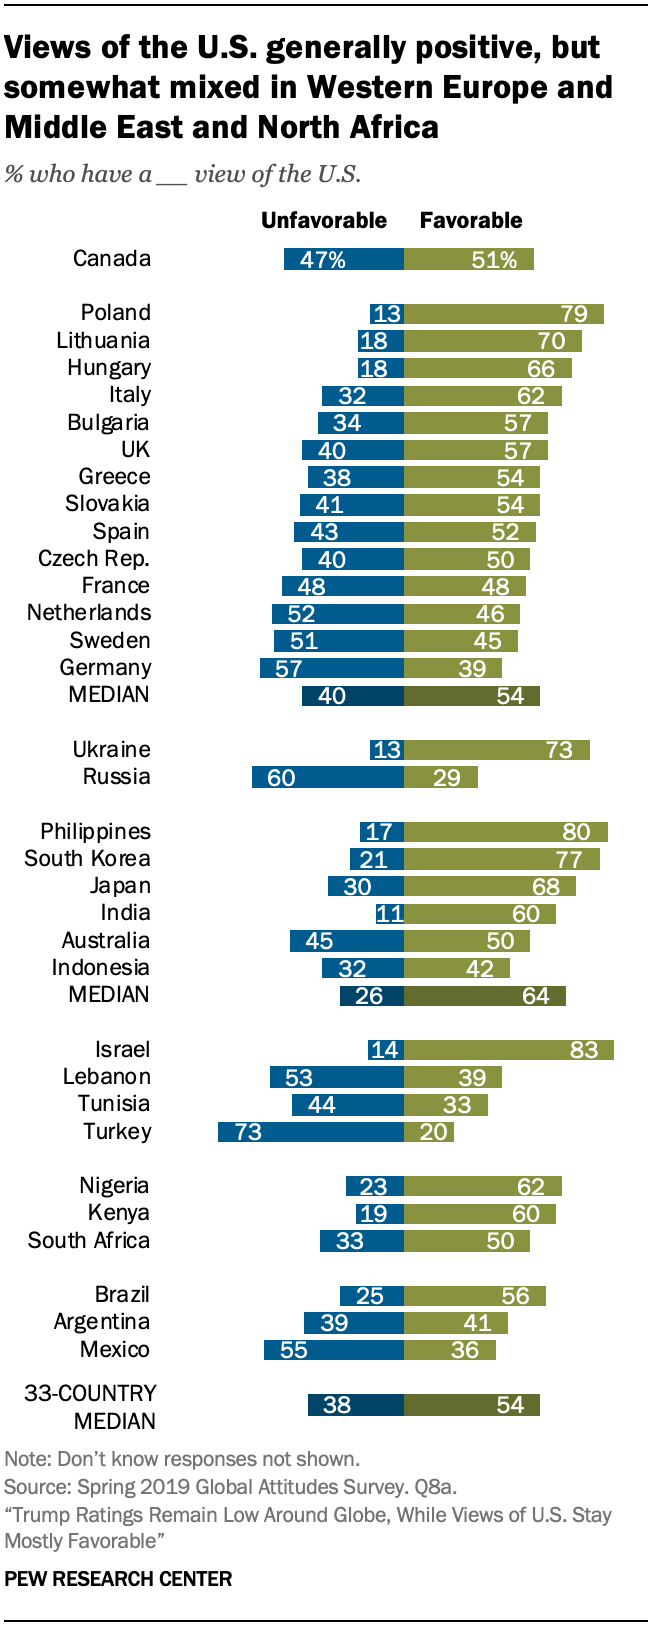 Views of the U.S. generally positive, but somewhat mixed in Western Europe and Middle East and North Africa 